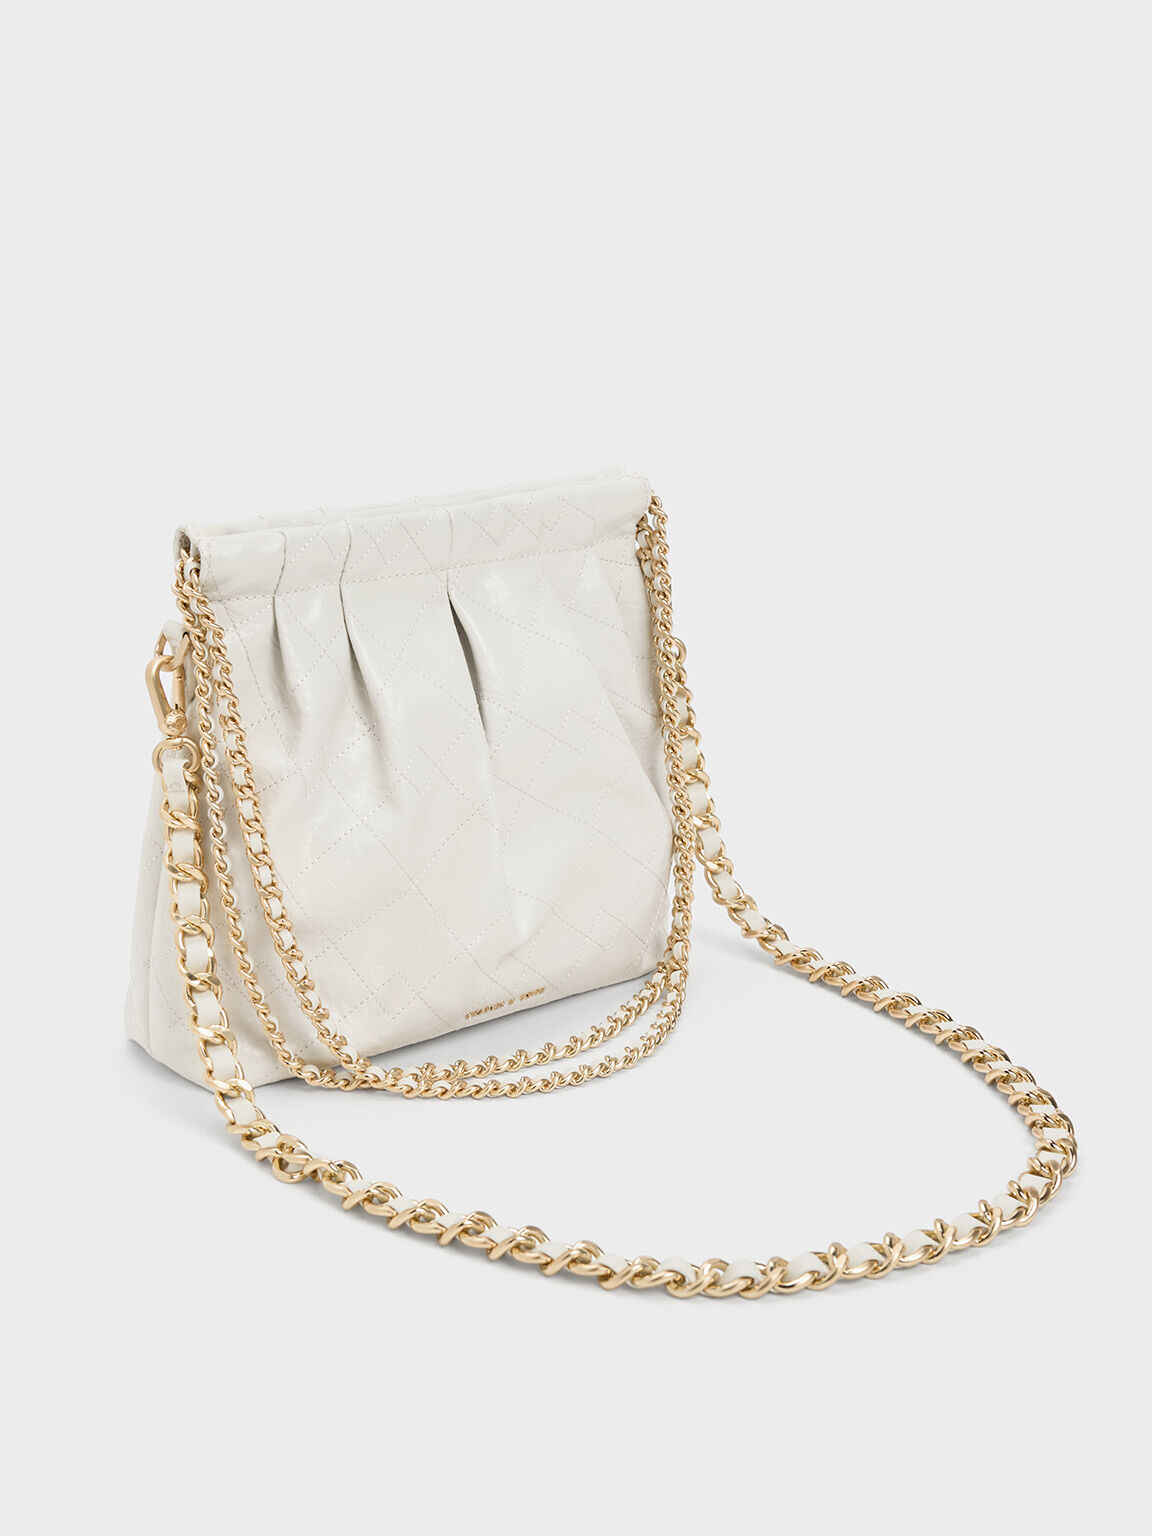 White Floral Lace Hand Bag with Pearl Chain